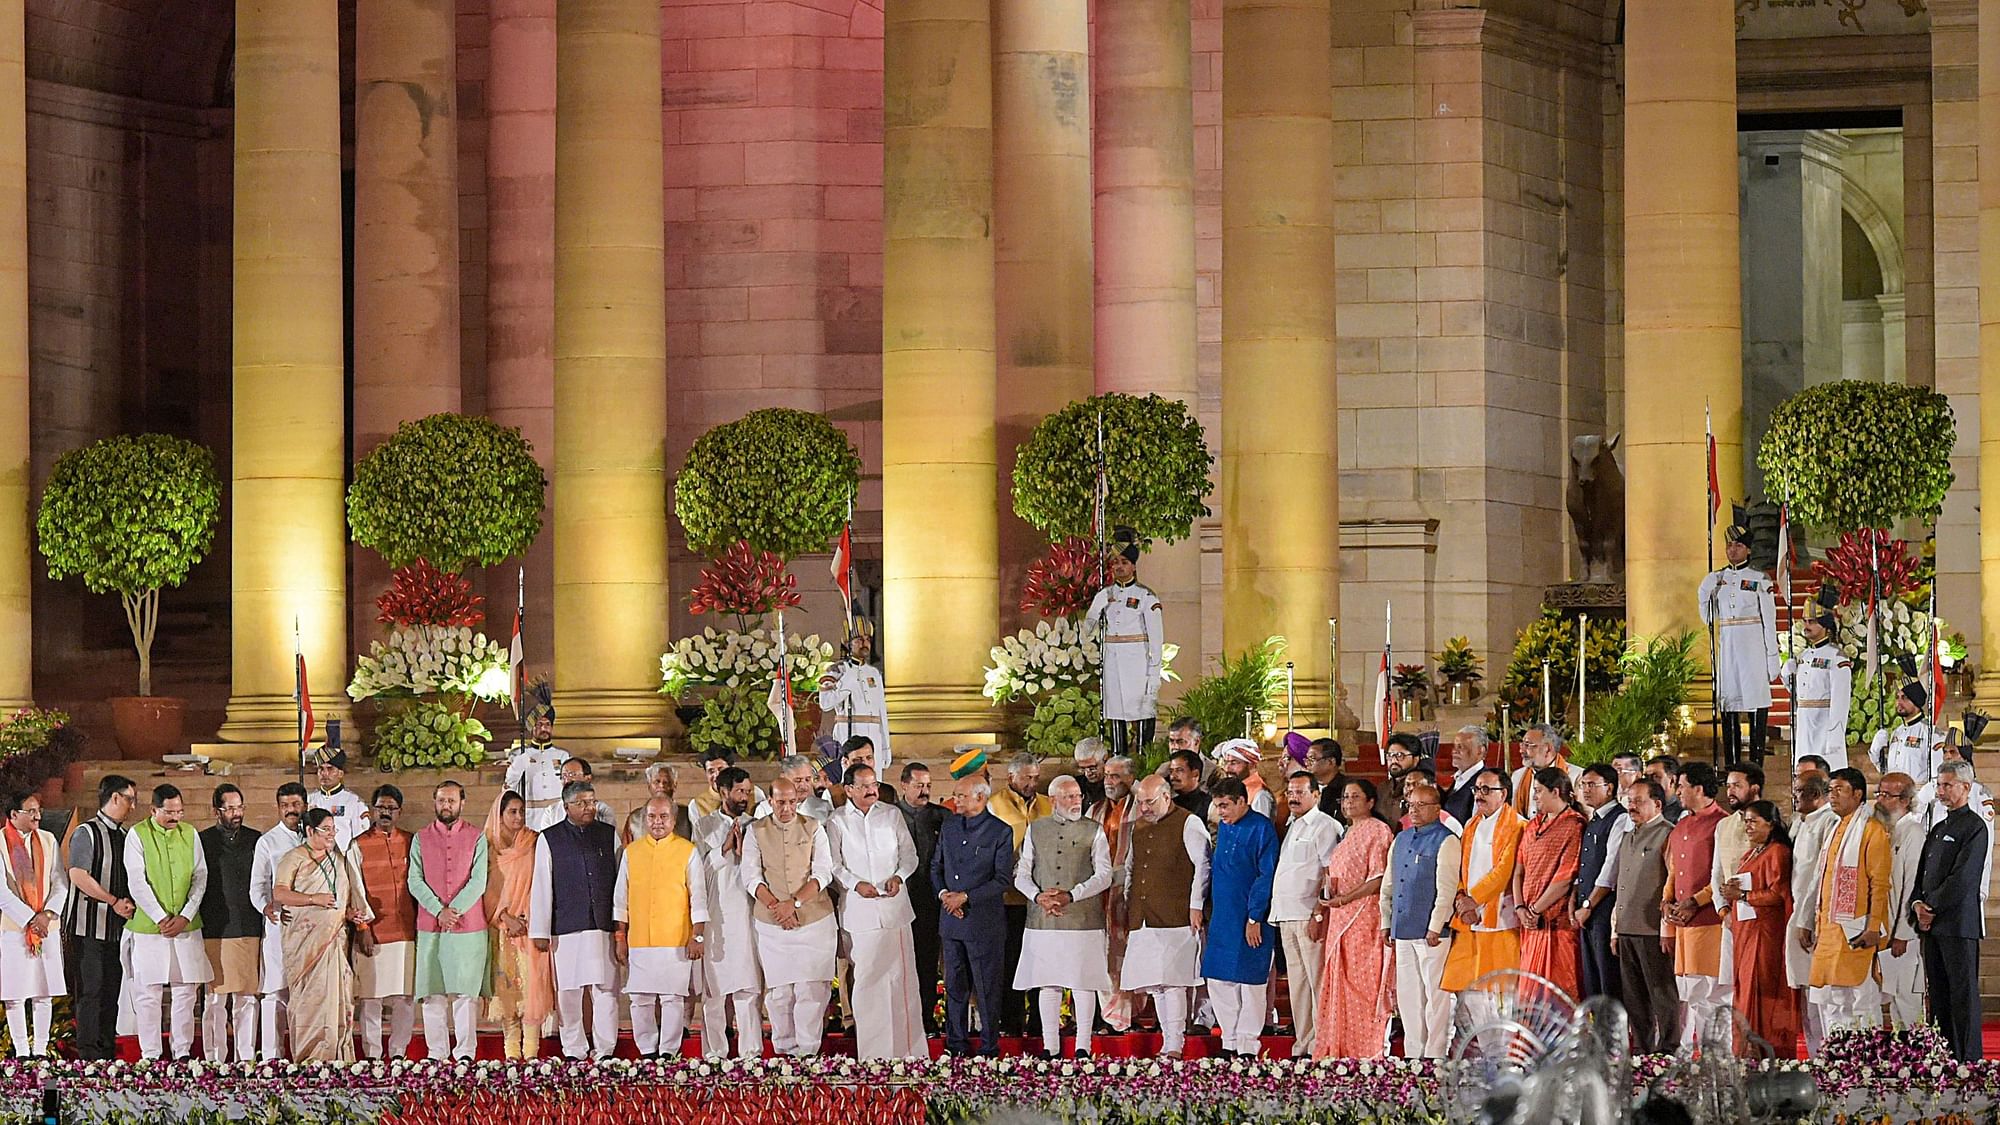 <div class="paragraphs"><p>President Ram Nath Kovind, Prime Minister Narendra Modi and the newly sworn-in council of ministers in a group photograph after the oath-taking ceremony at Rashtrapati Bhavan in New Delhi.</p></div>